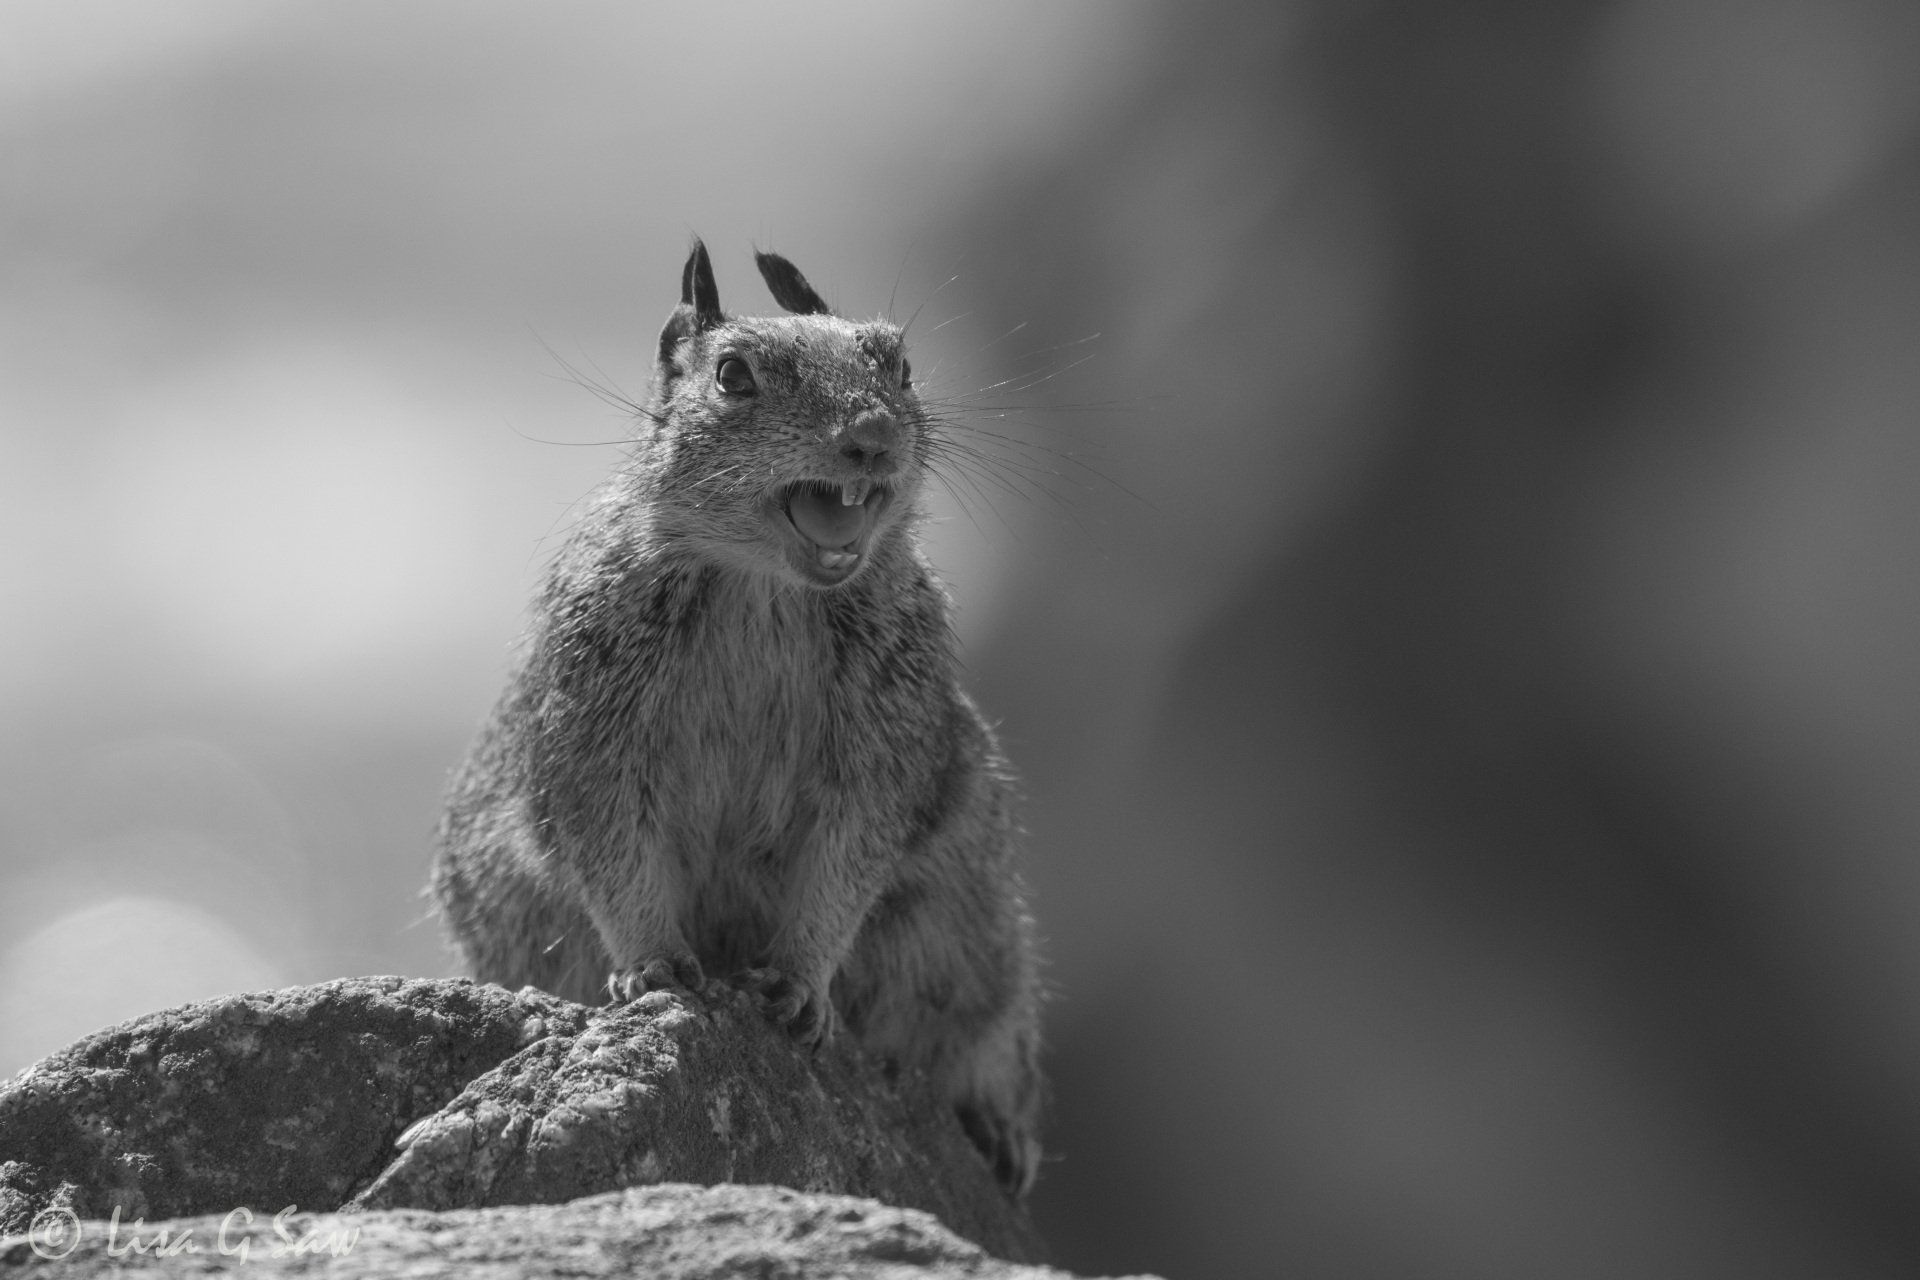 Ground squirrel calling out up close (black and white)